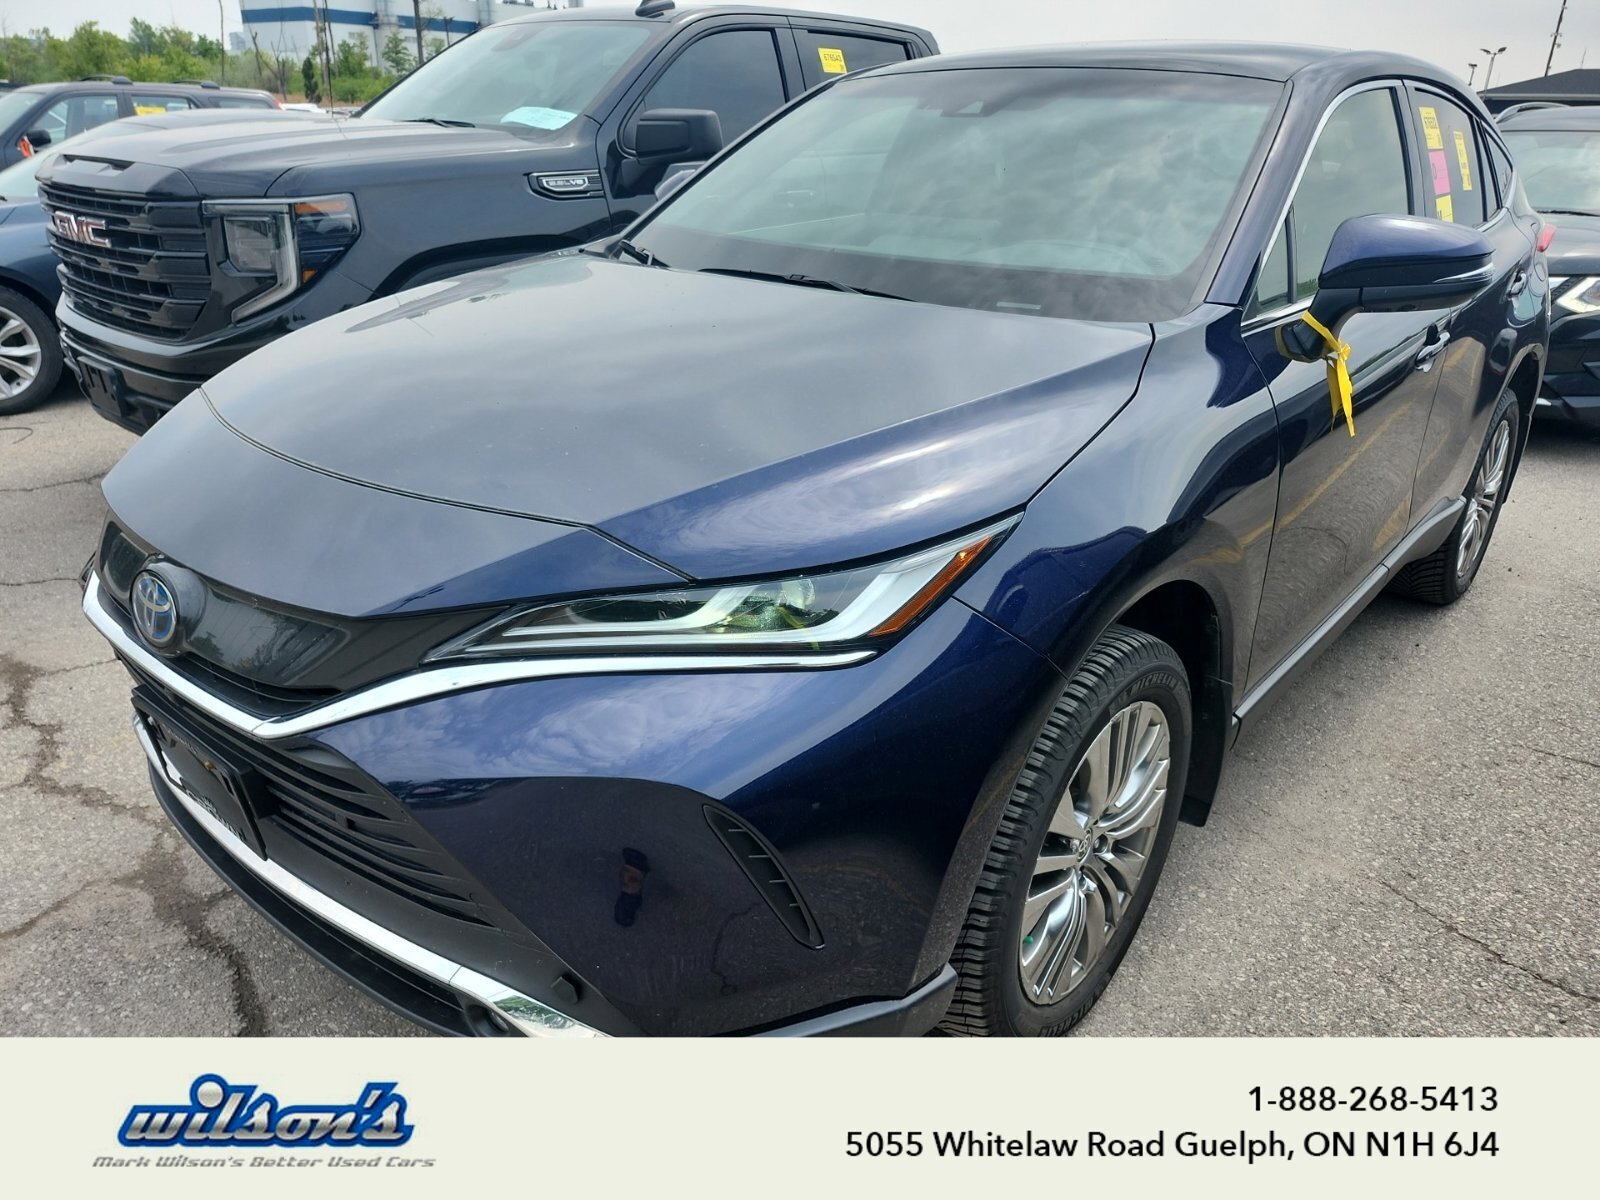 2022 Toyota Venza Limited Hybrid, Leather, Fixed Glass Roof, Nav, Co